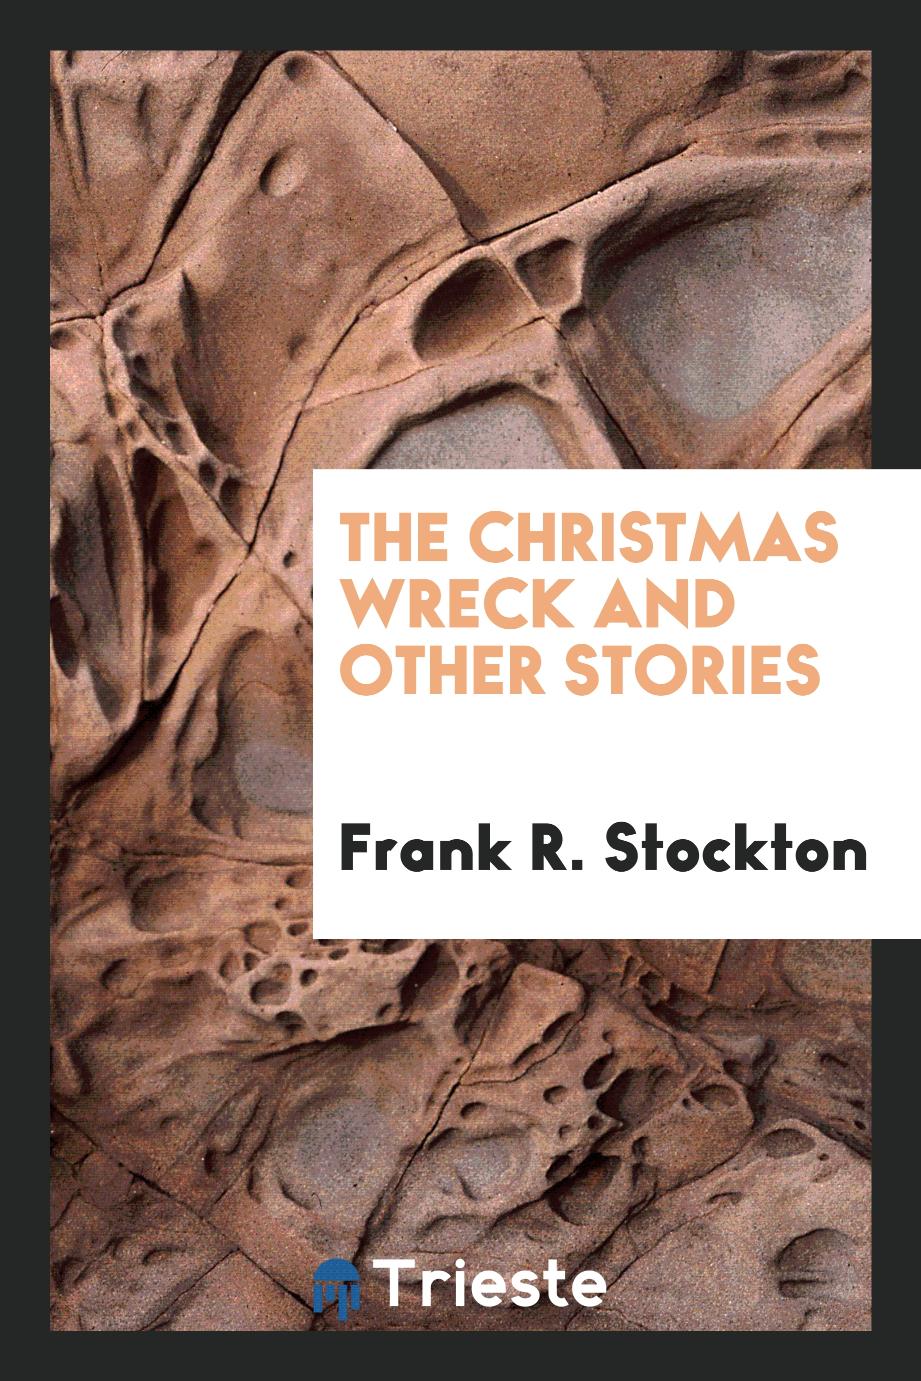 The Christmas wreck and other stories